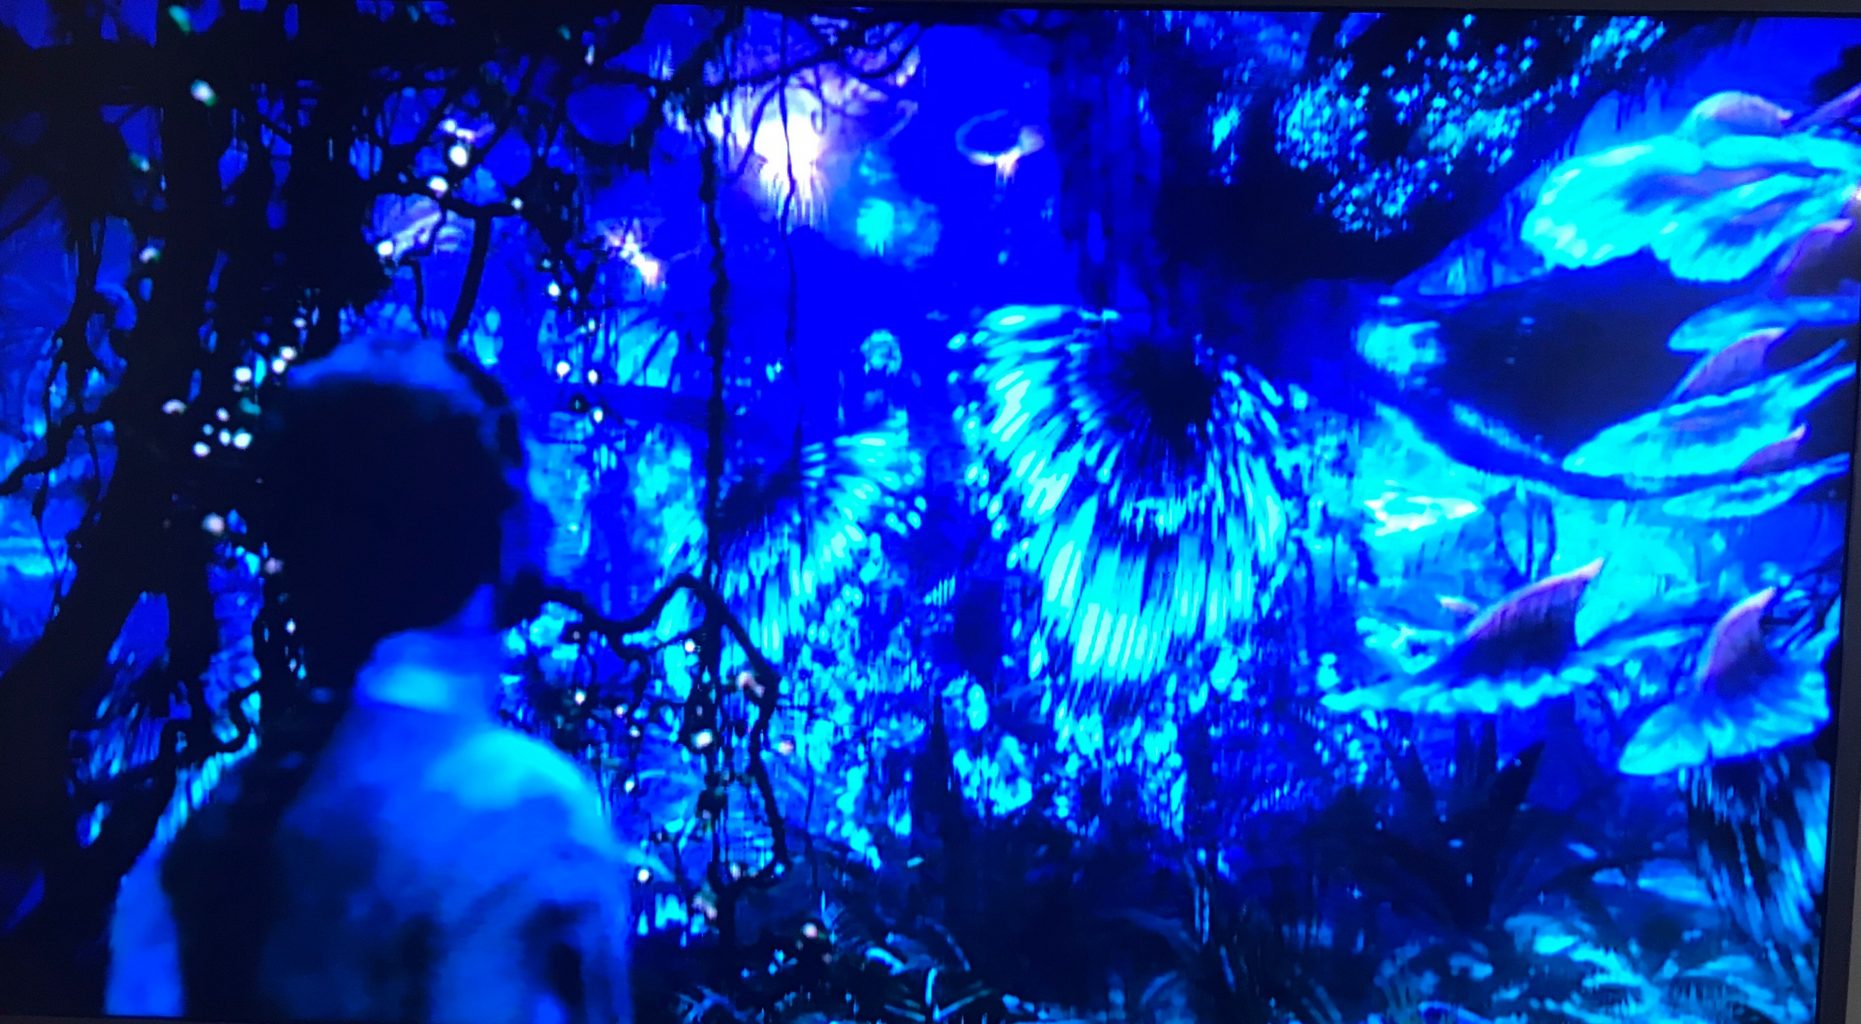 A scene from Avatar where a Na'vi, the blue alien race from the planet Pandora, looks out in a jungle scene full of plants and winged creatures